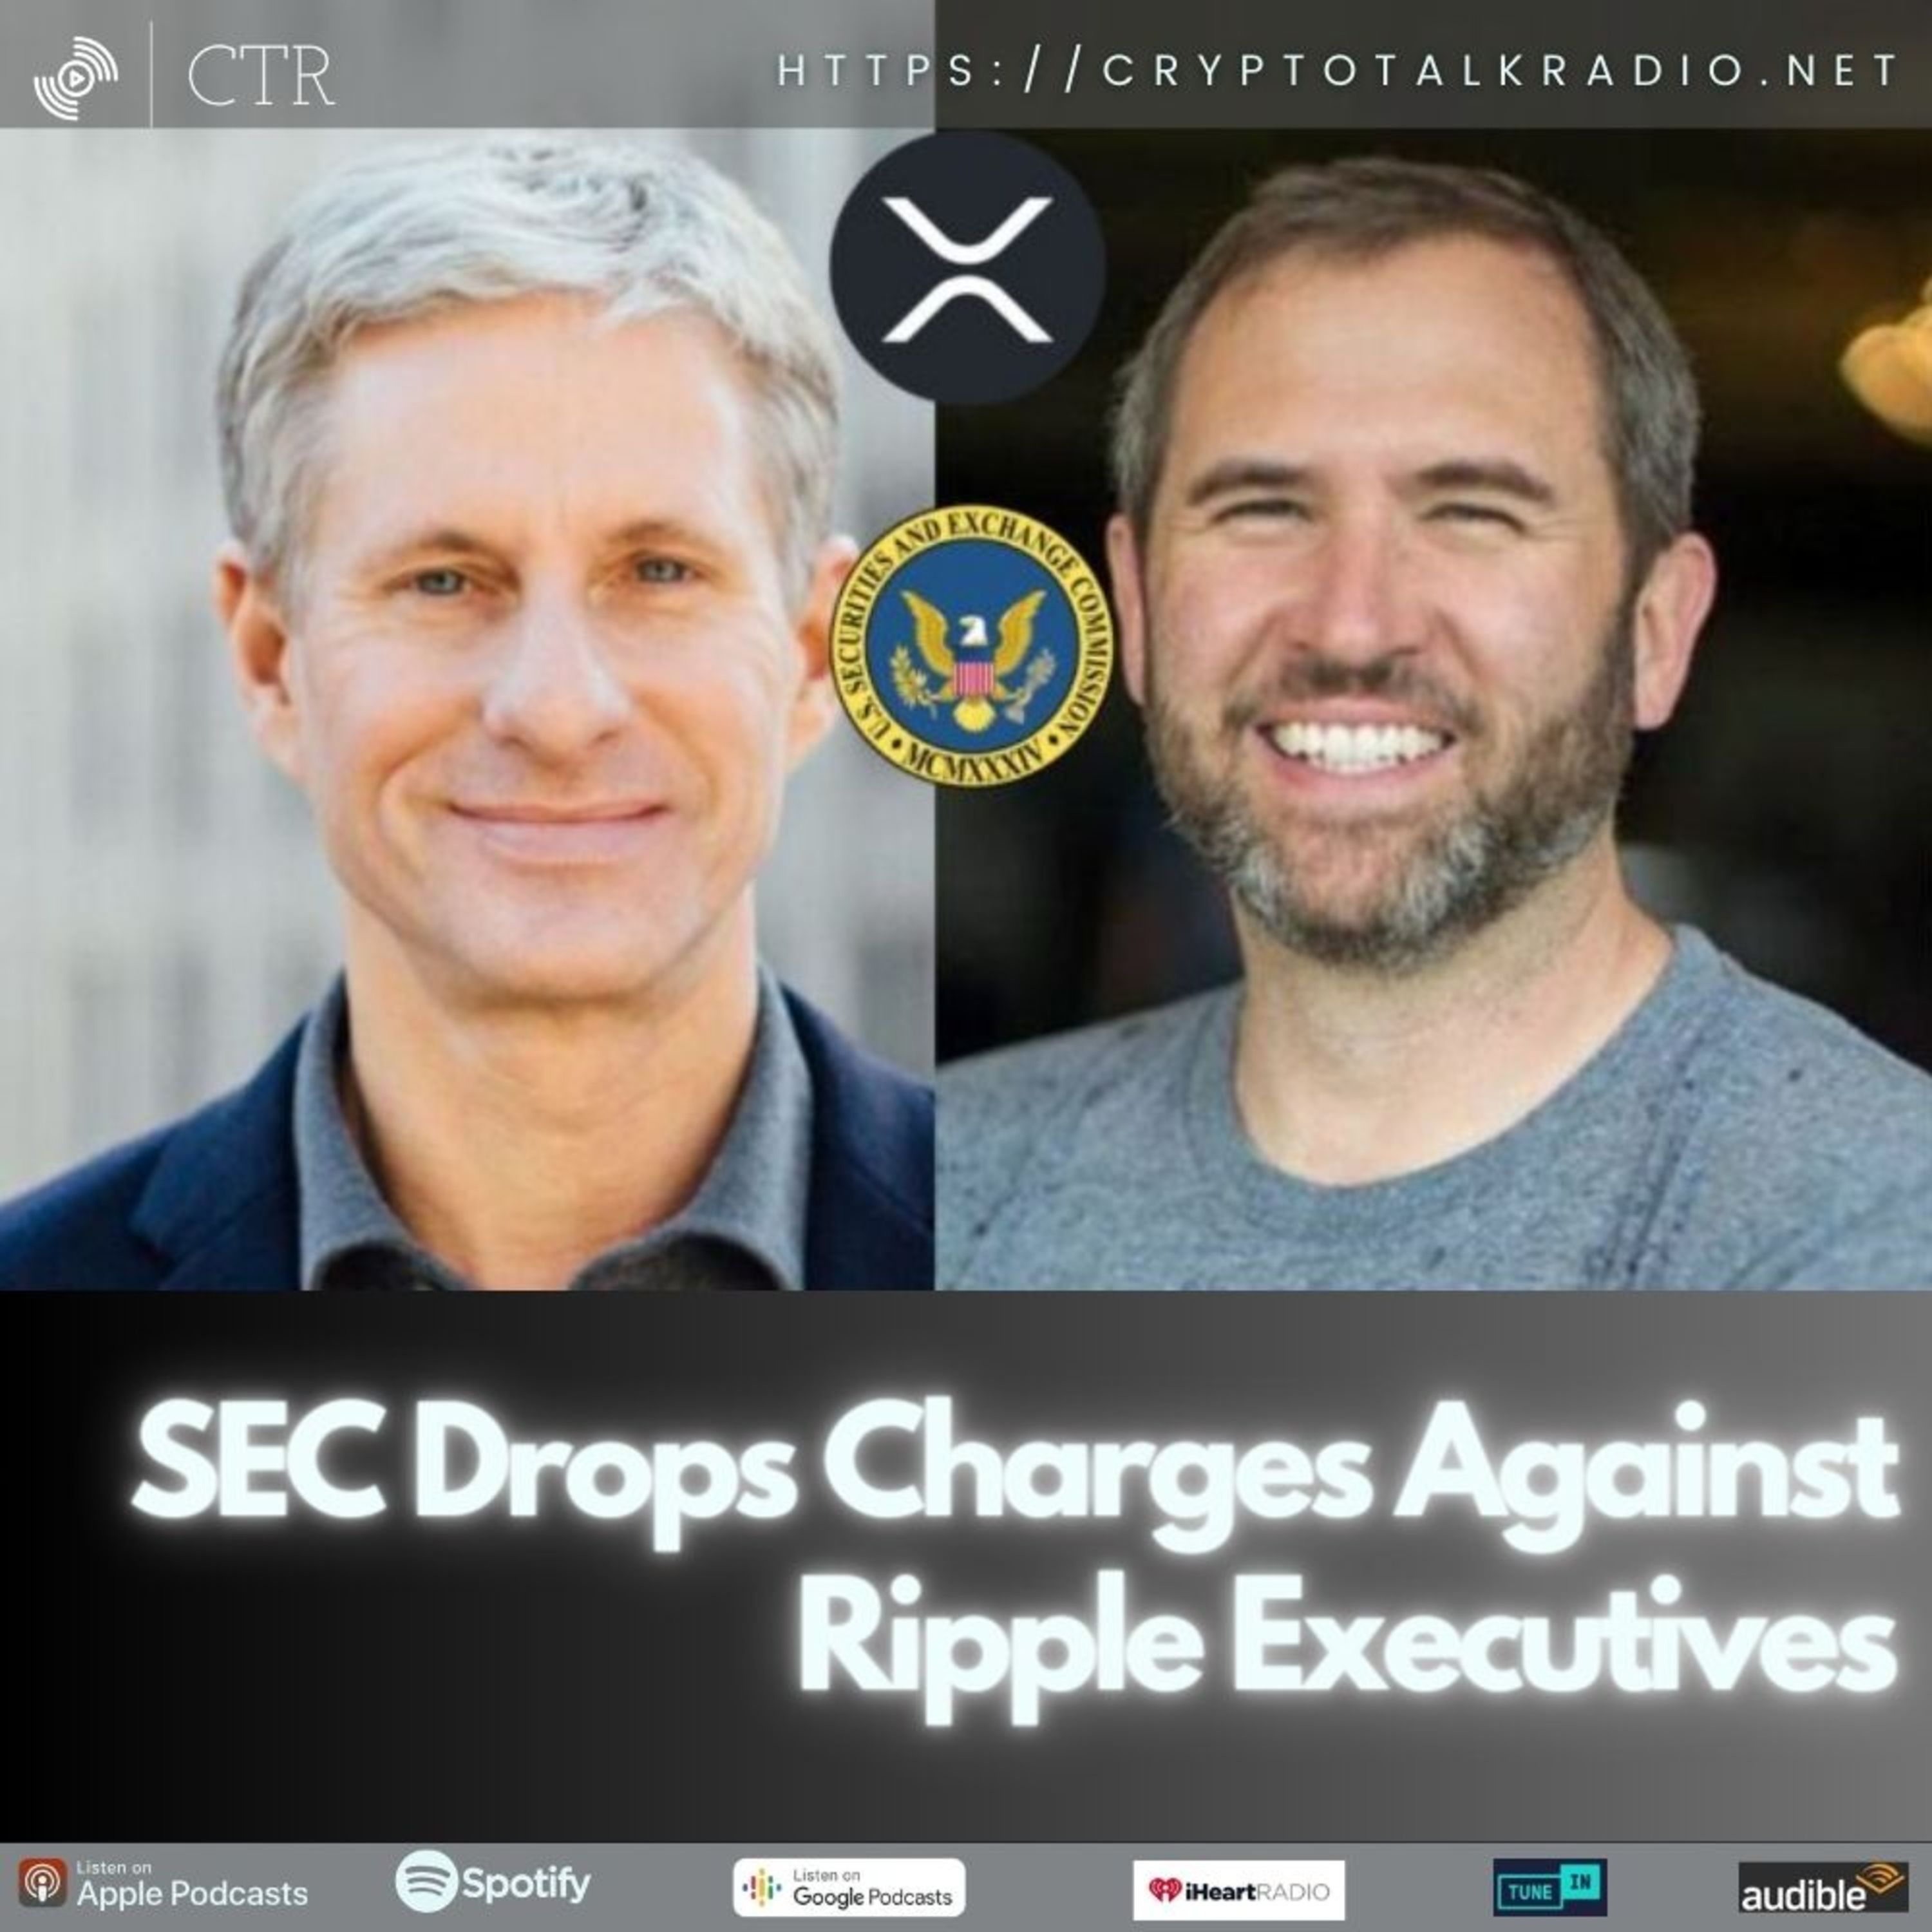 #SEC Drops Charges Against #Ripple Executives